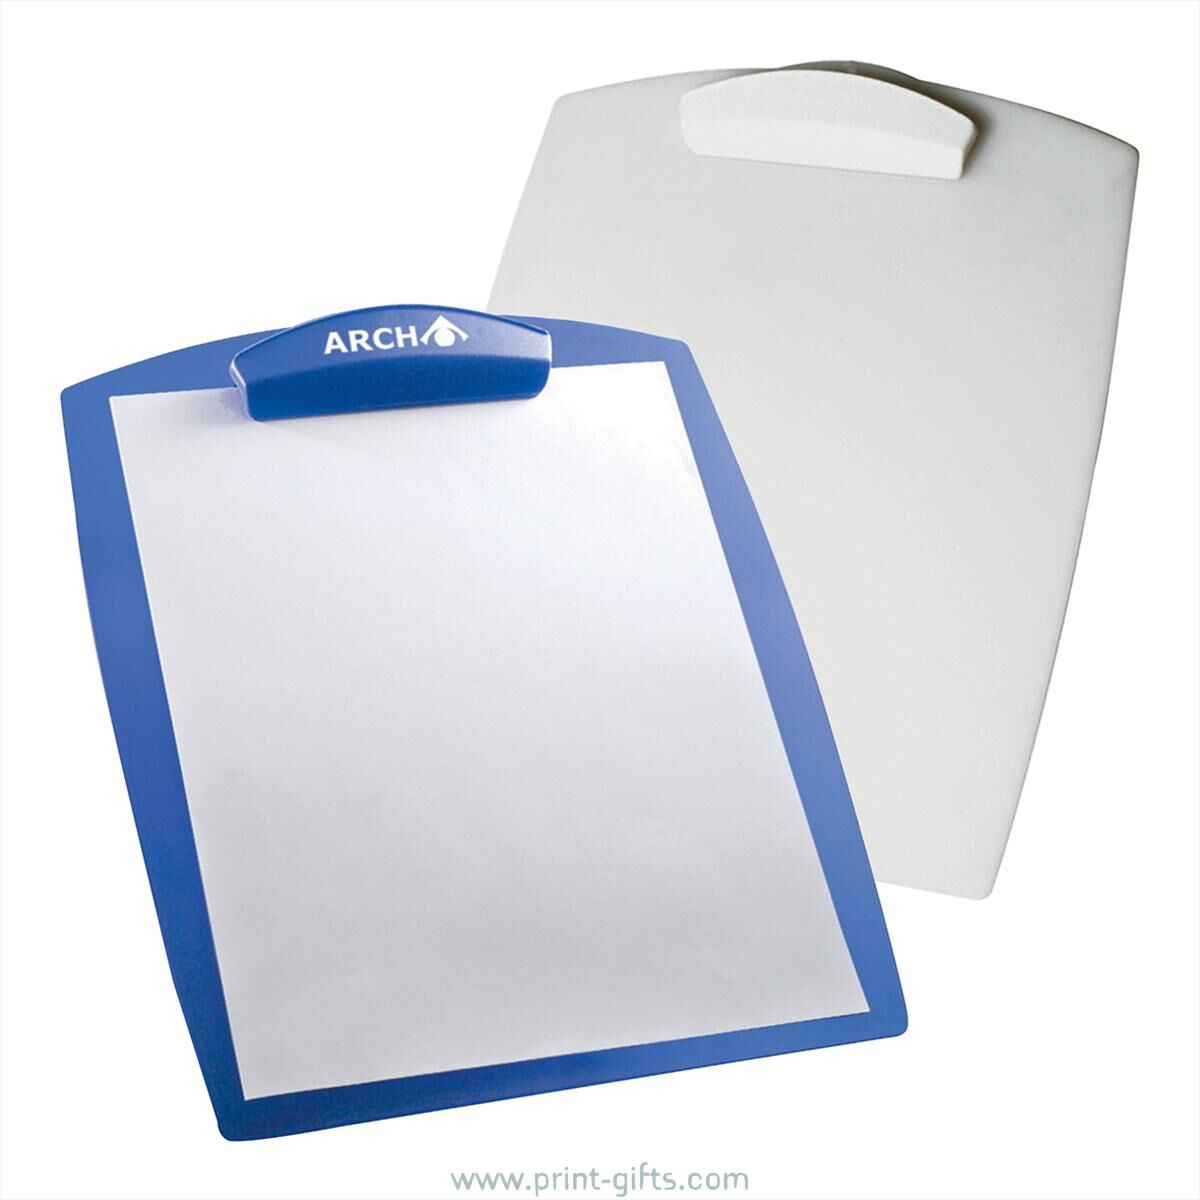 Branded Conference Clipboards A4 Paper Size